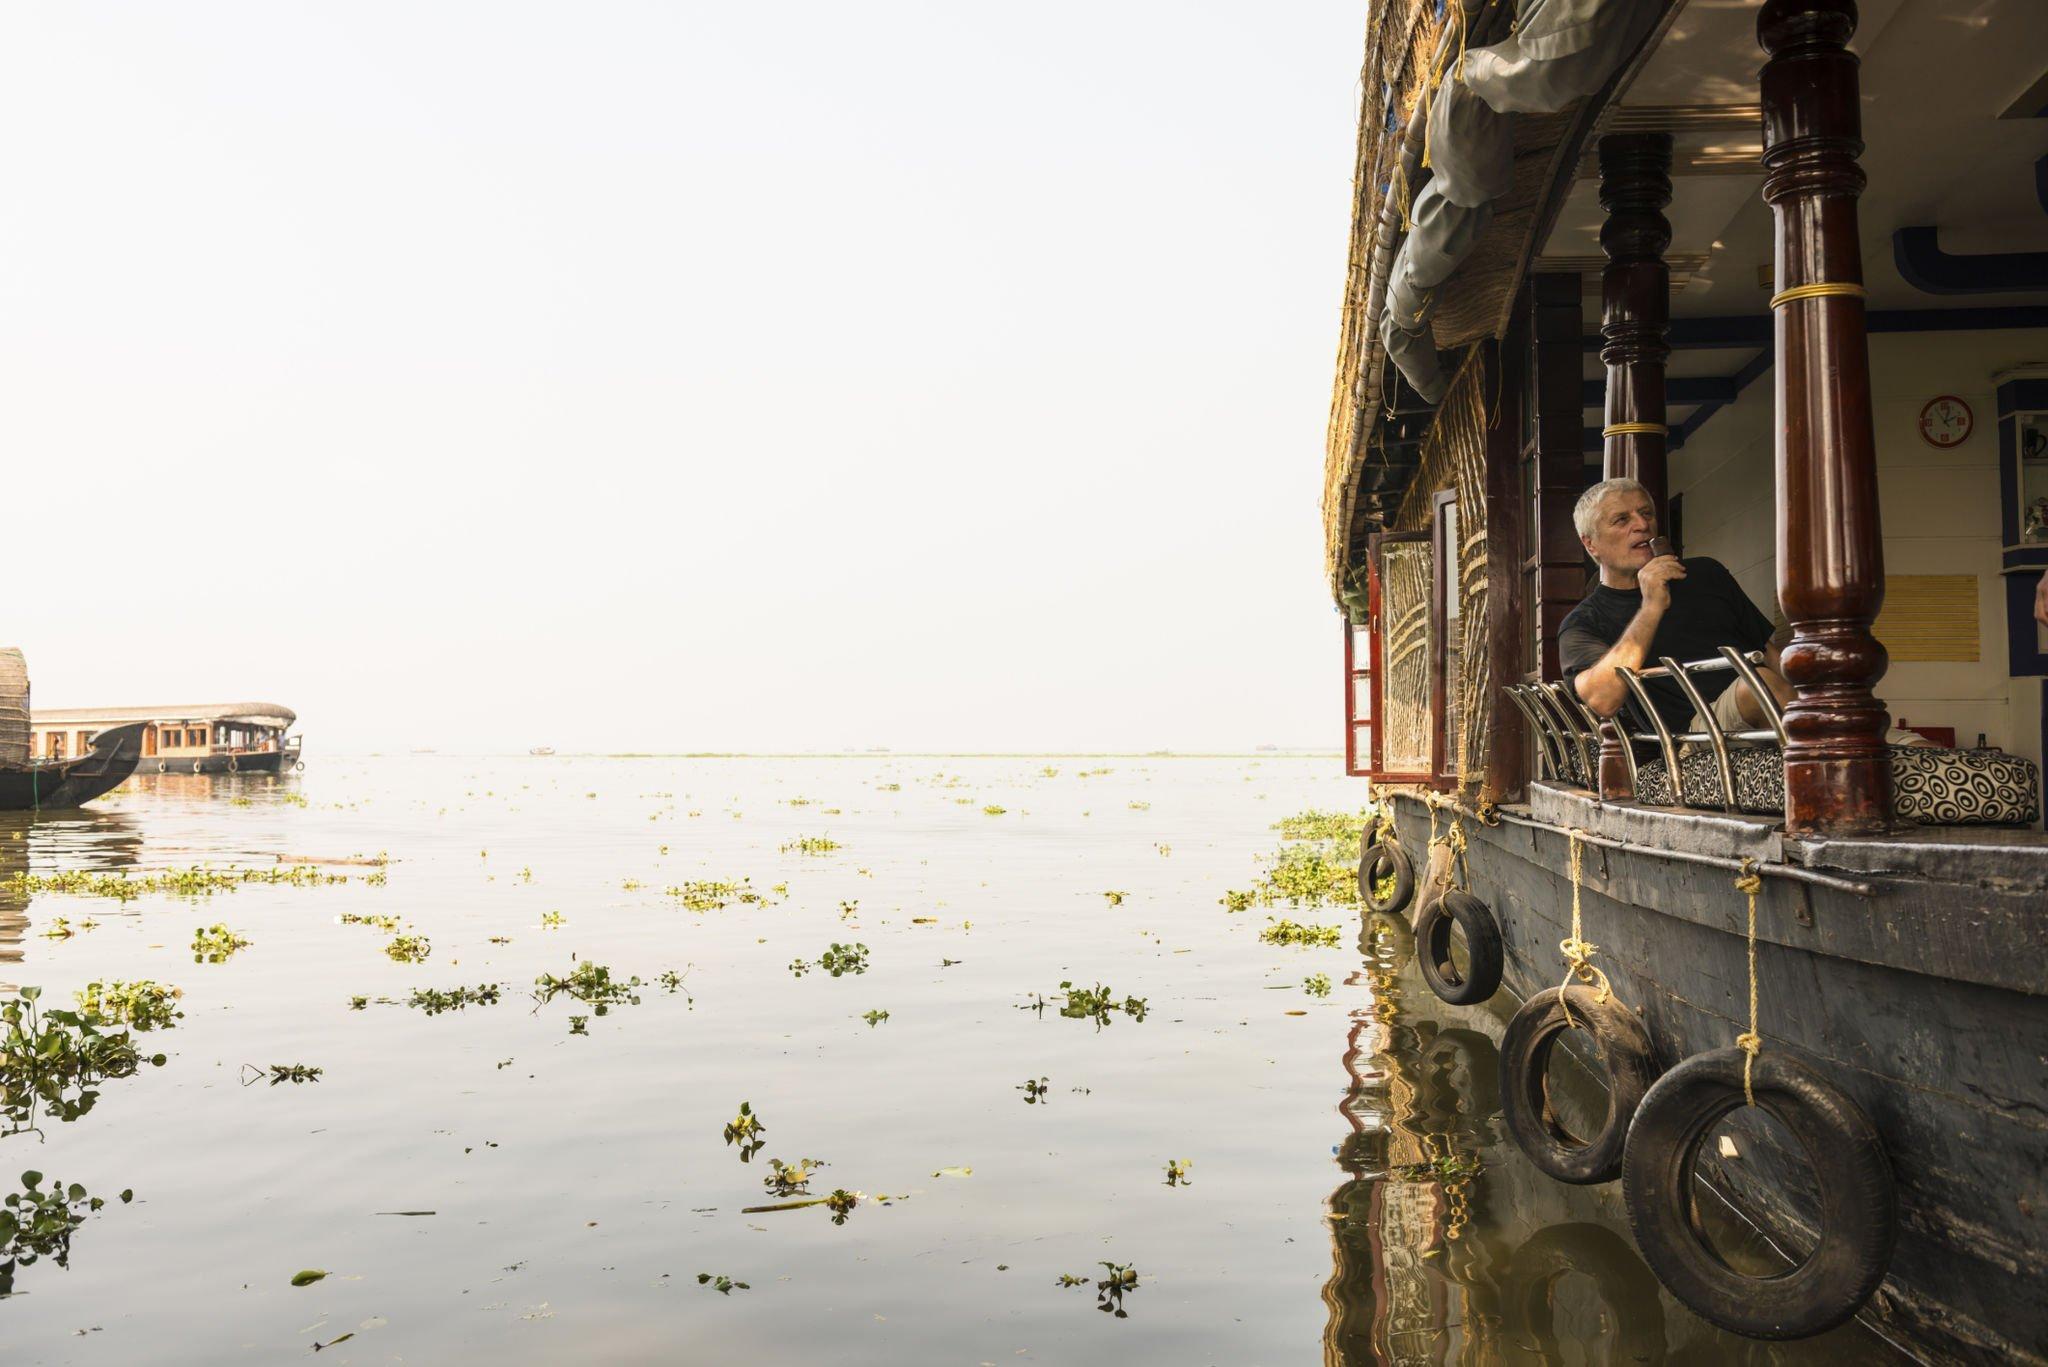  Make Memories on a Budget: Affordable Offers for Kerala Backwaters Adventures